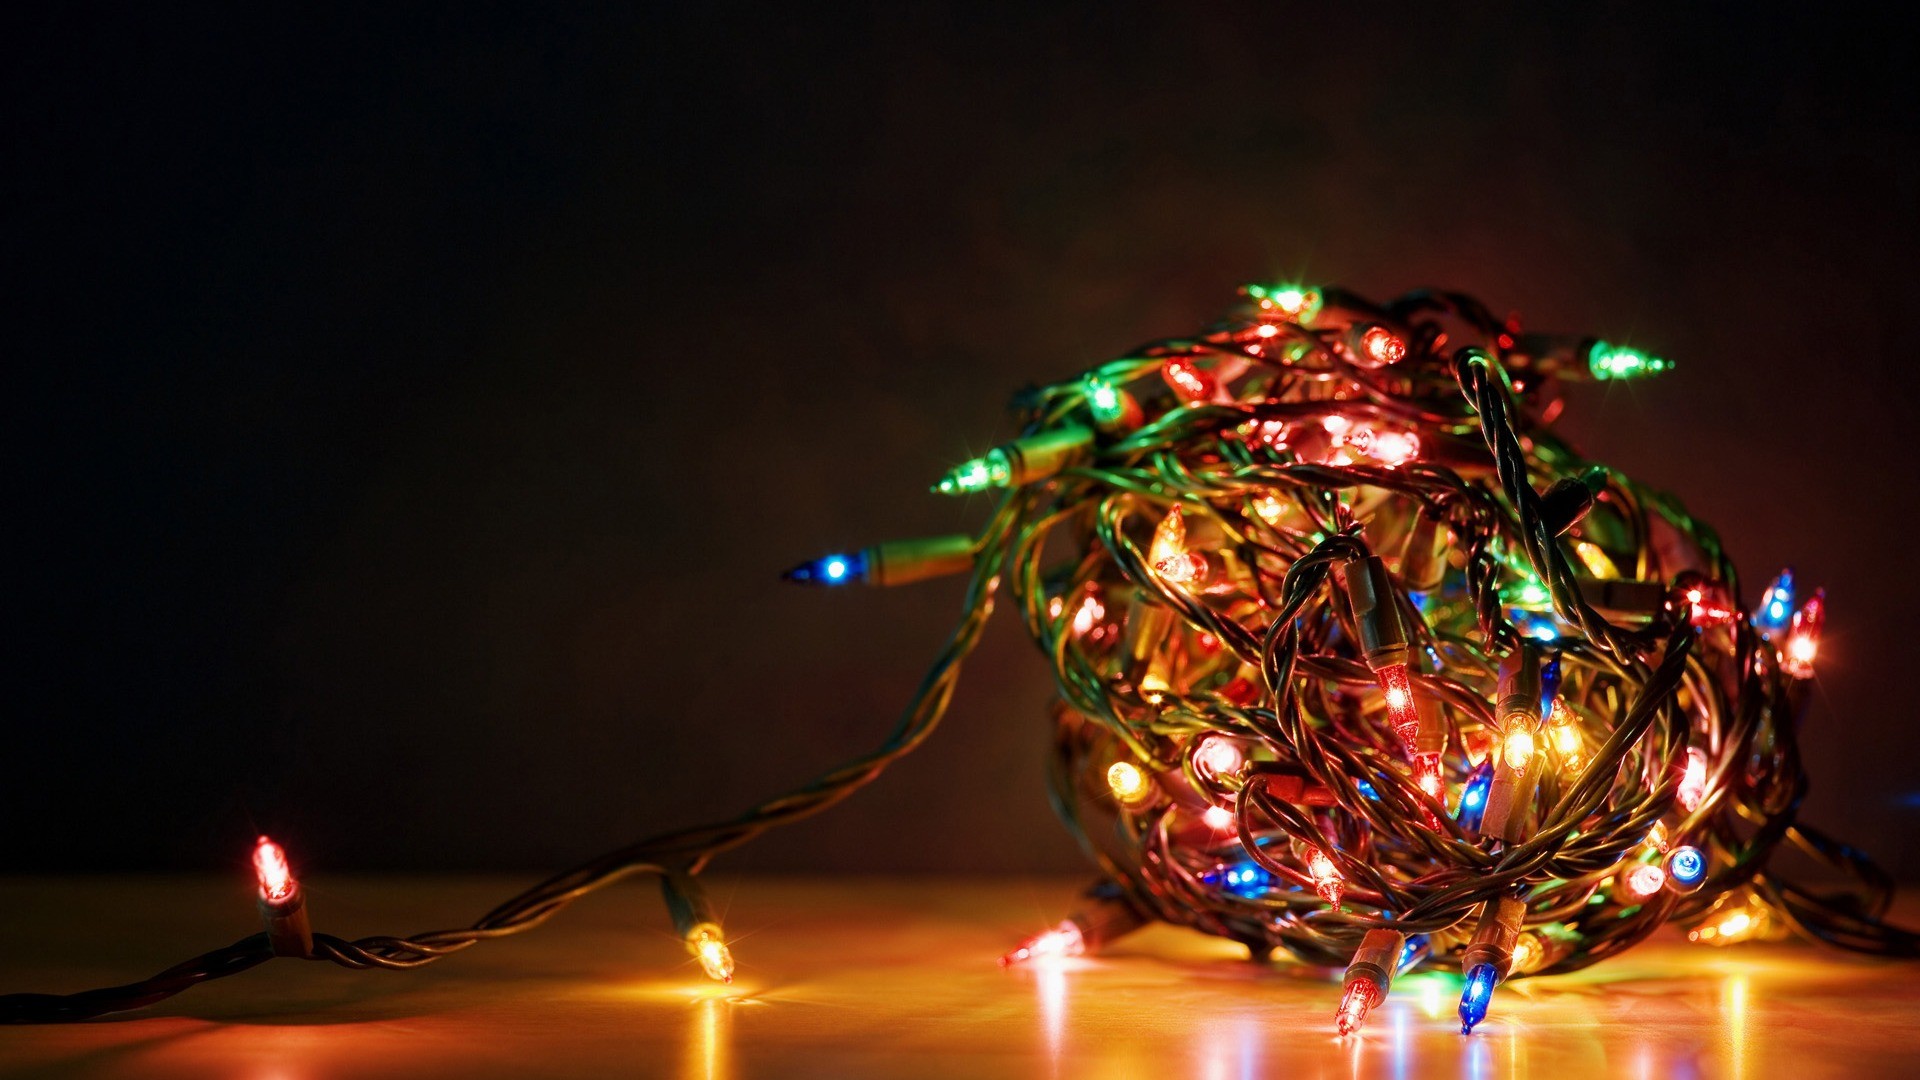 1920x1080 Full Size of Christmas: Christmas Lights Wallpaper Free For Laptop Computer  Hd: ...